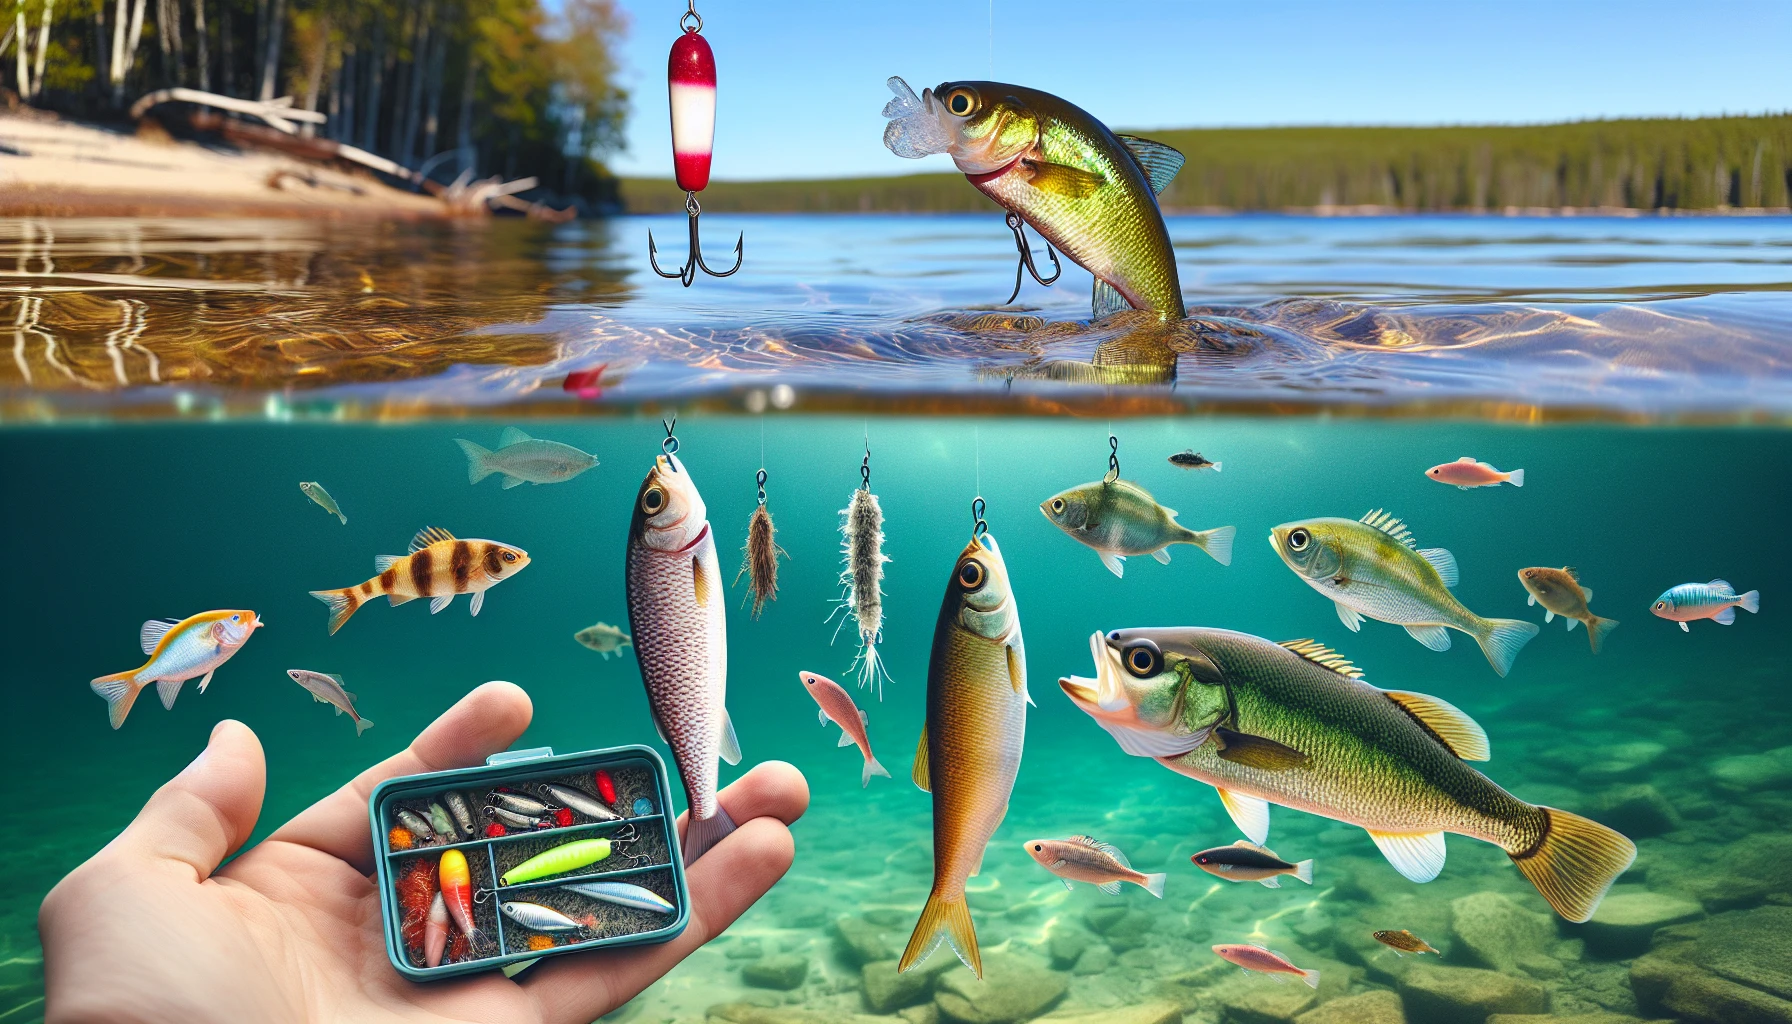 Underwater scene with artificial lures, live bait fishes, and a hand holding a box of assorted lures.